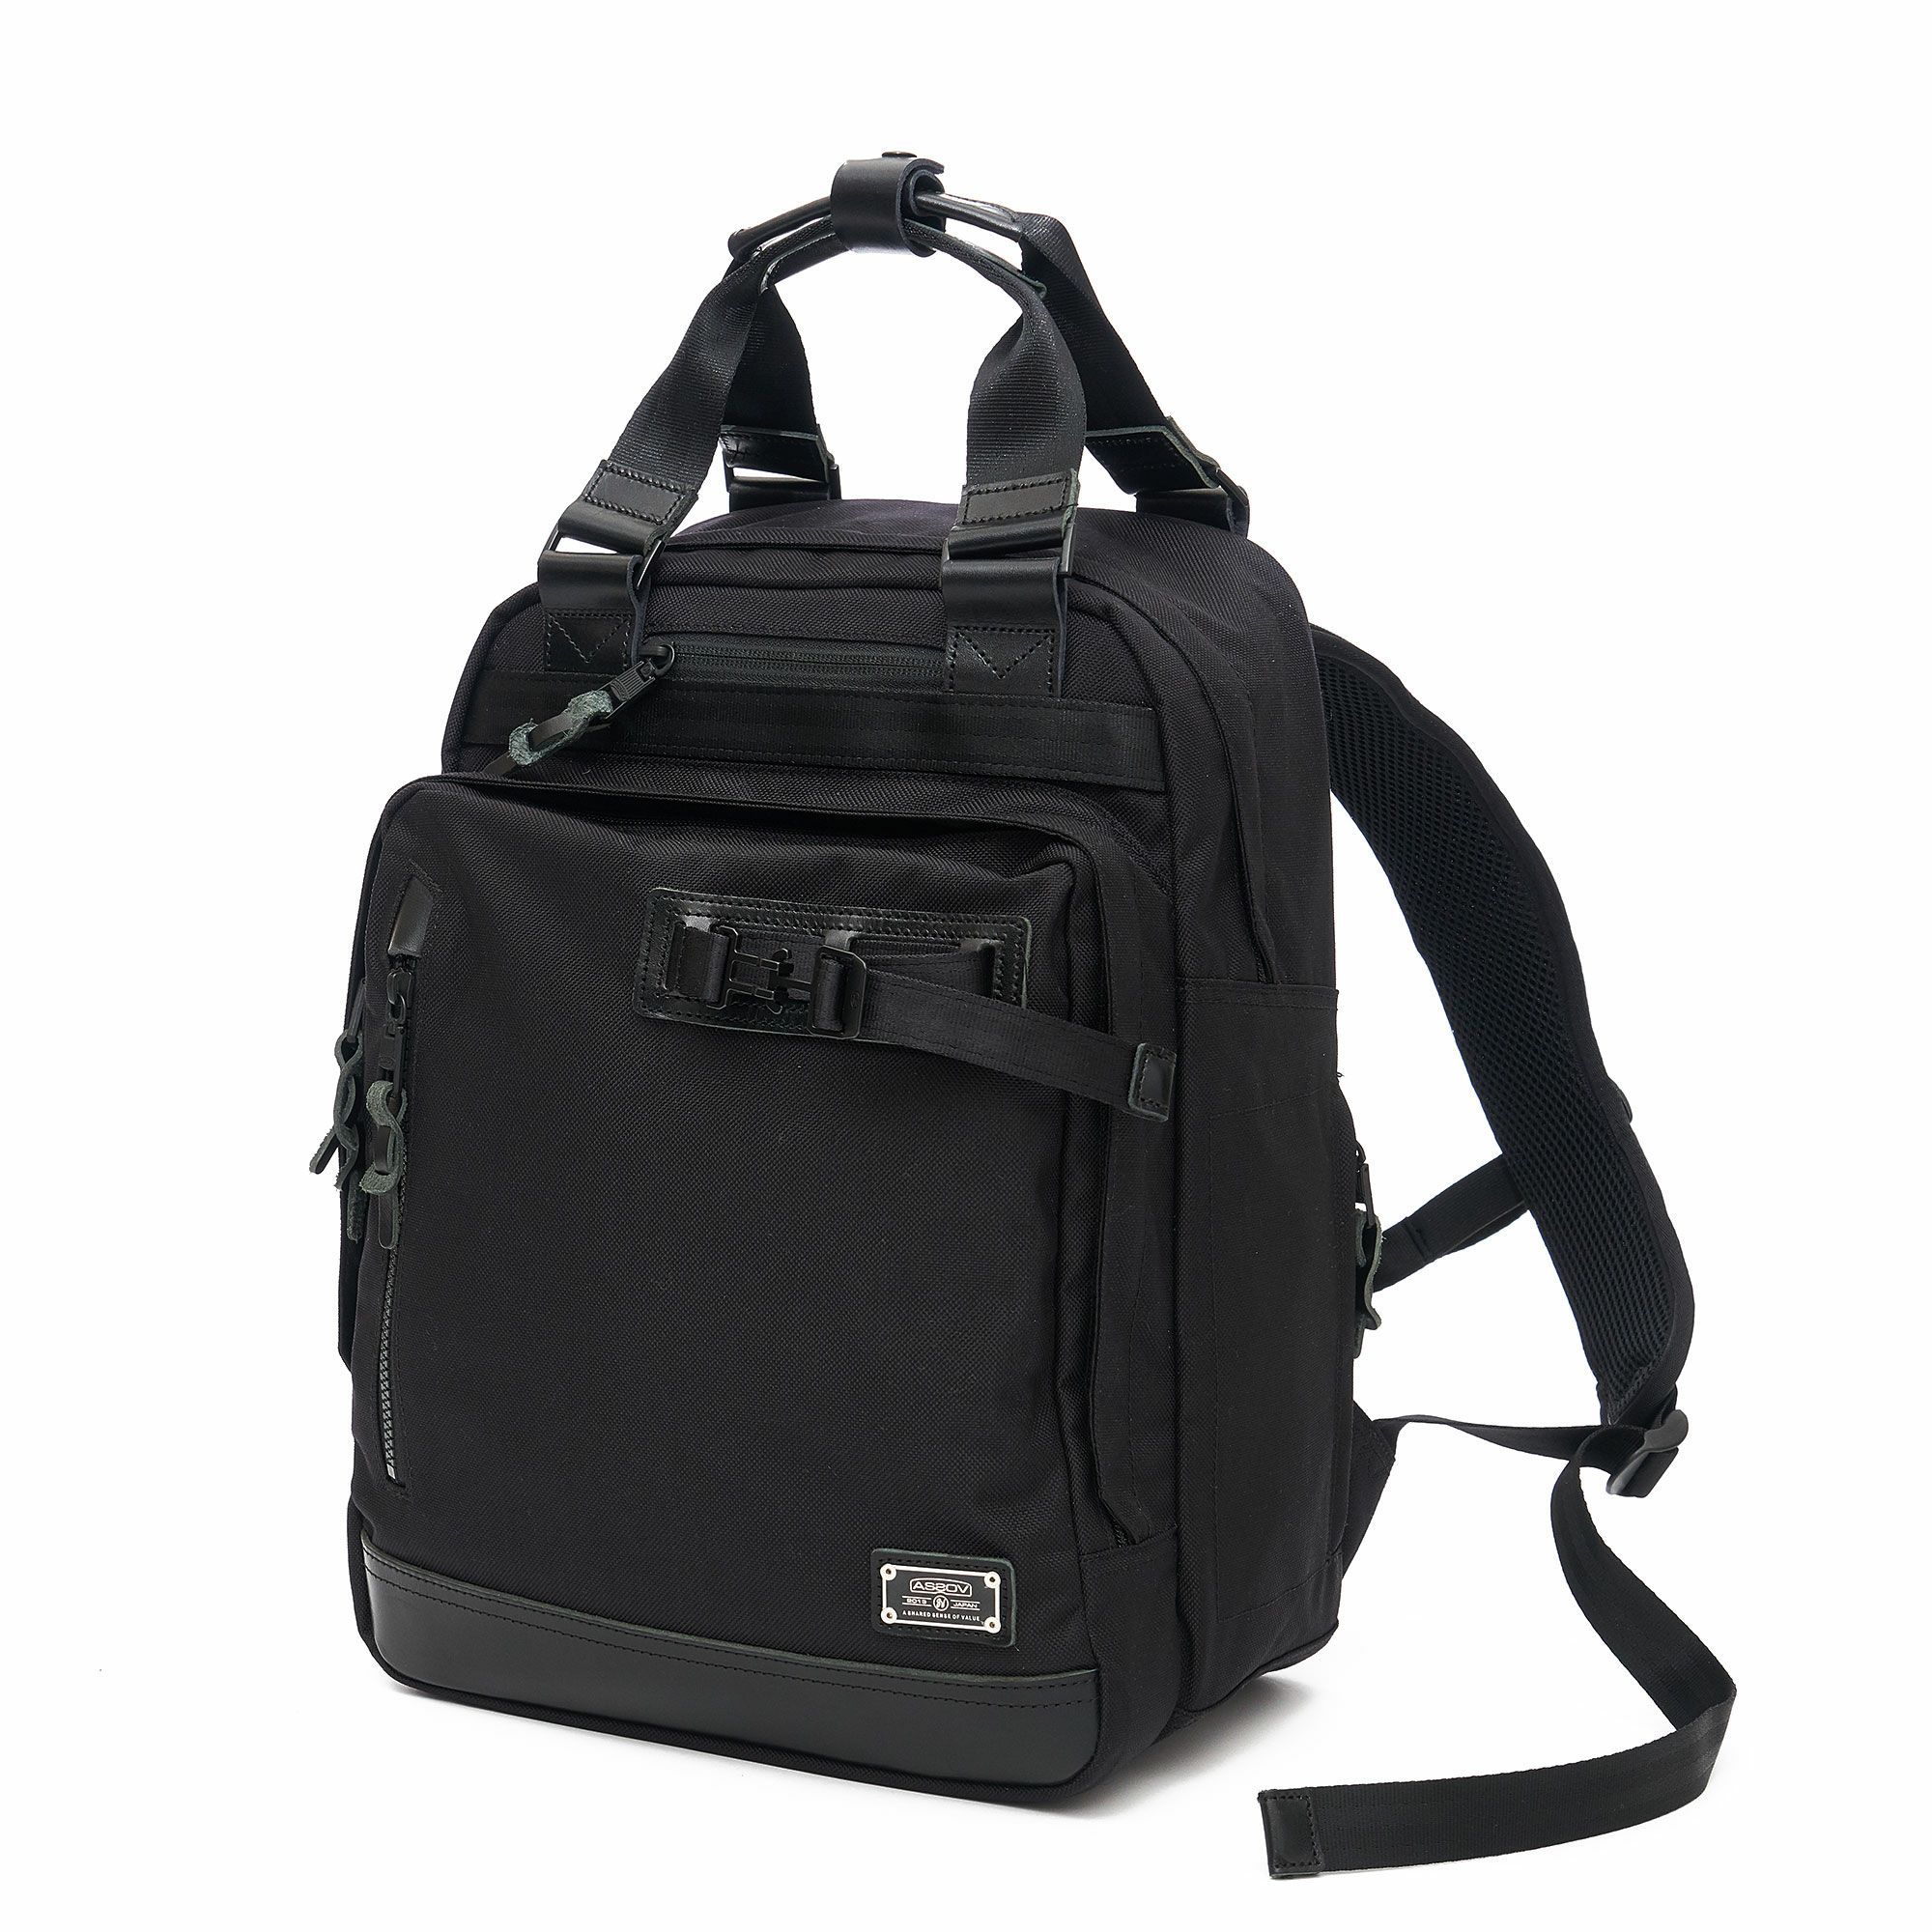 AS2OV (アッソブ) , EXCLUSIVE BALLISTIC NYLON 2WAY TOTE BACK PACK / バックパック リュック